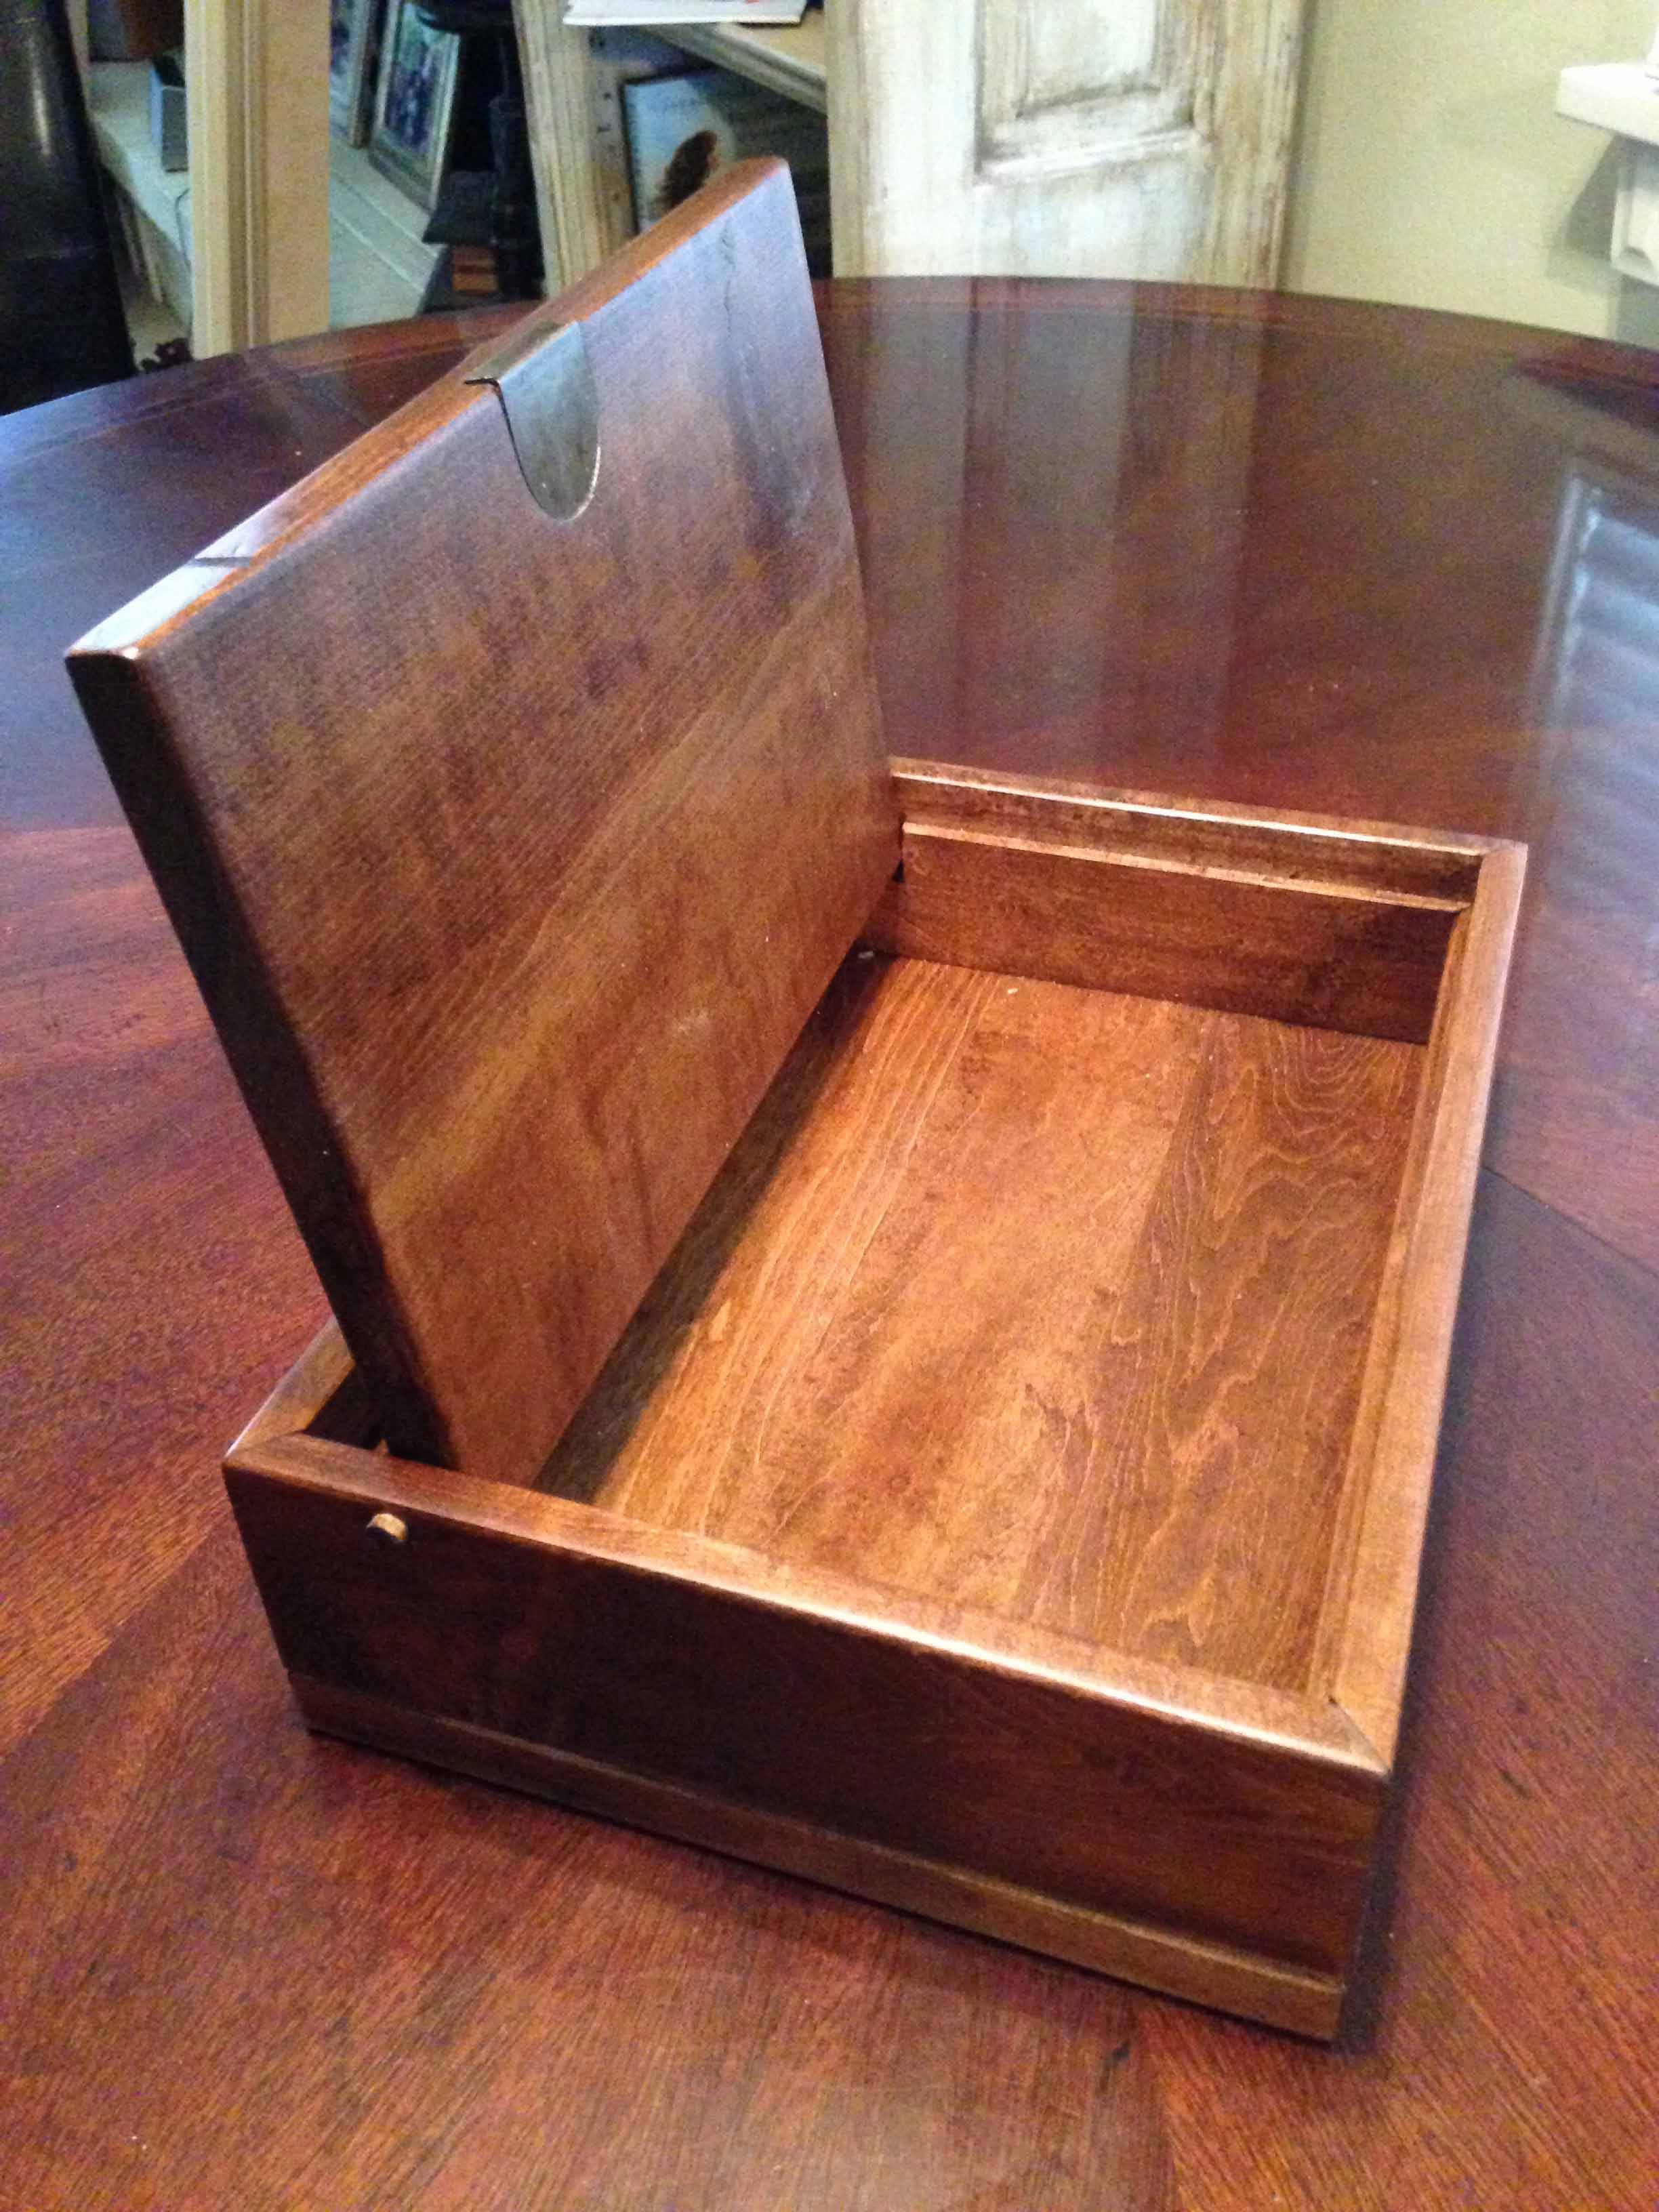 How To Build A Small Wooden Box Using The Parts From An Old Dresser